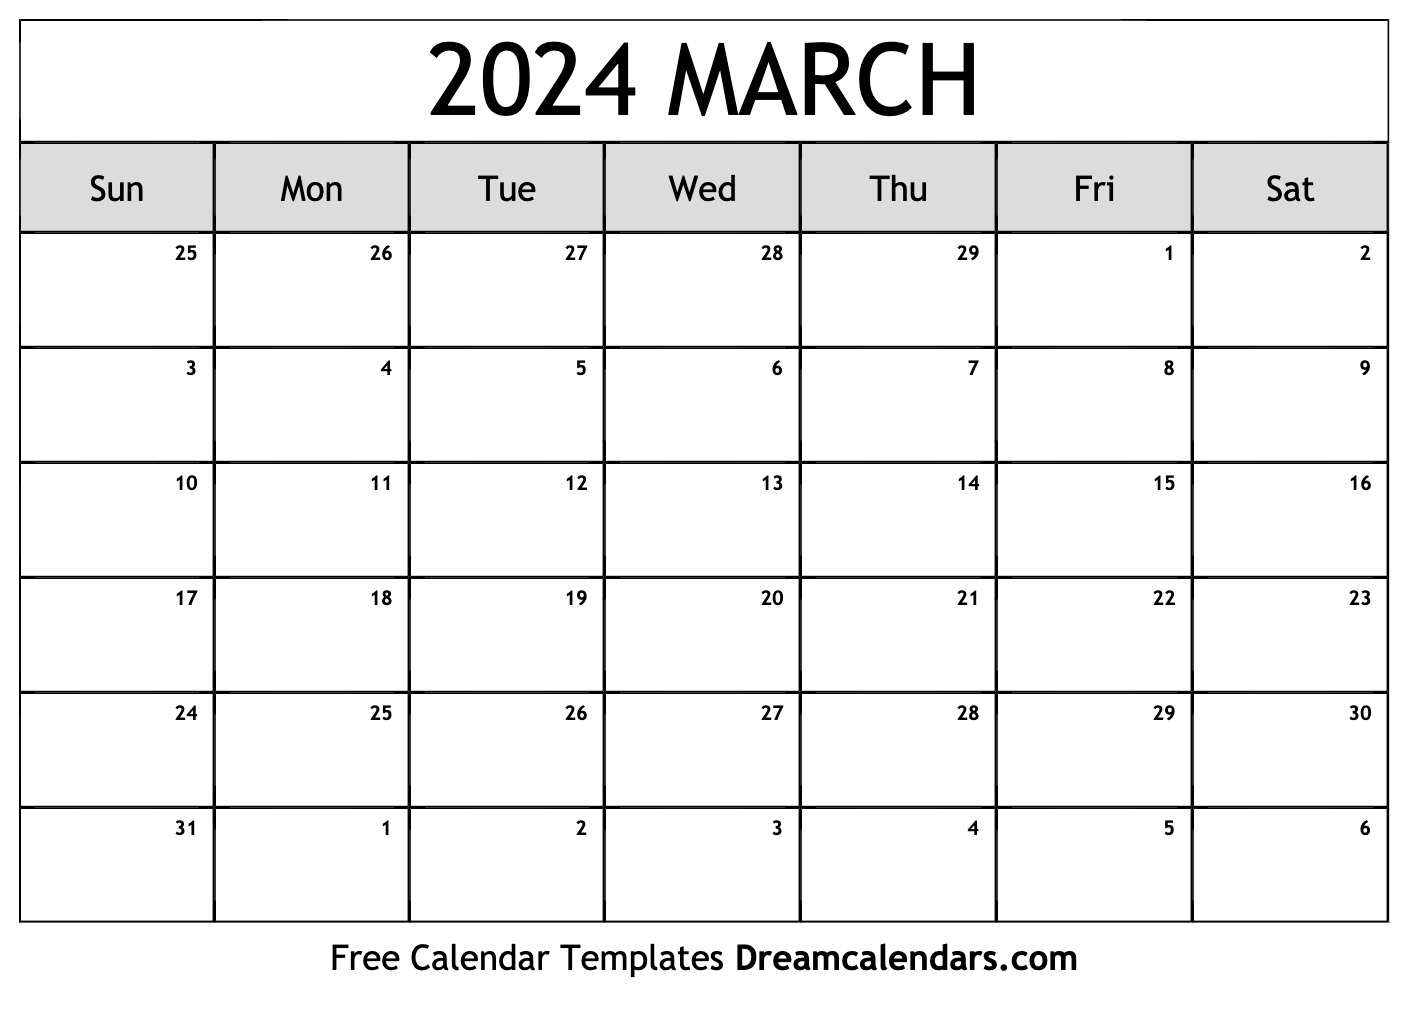 March 2024 Calendar | Free Blank Printable With Holidays for Free March 2024 Calendar Printable